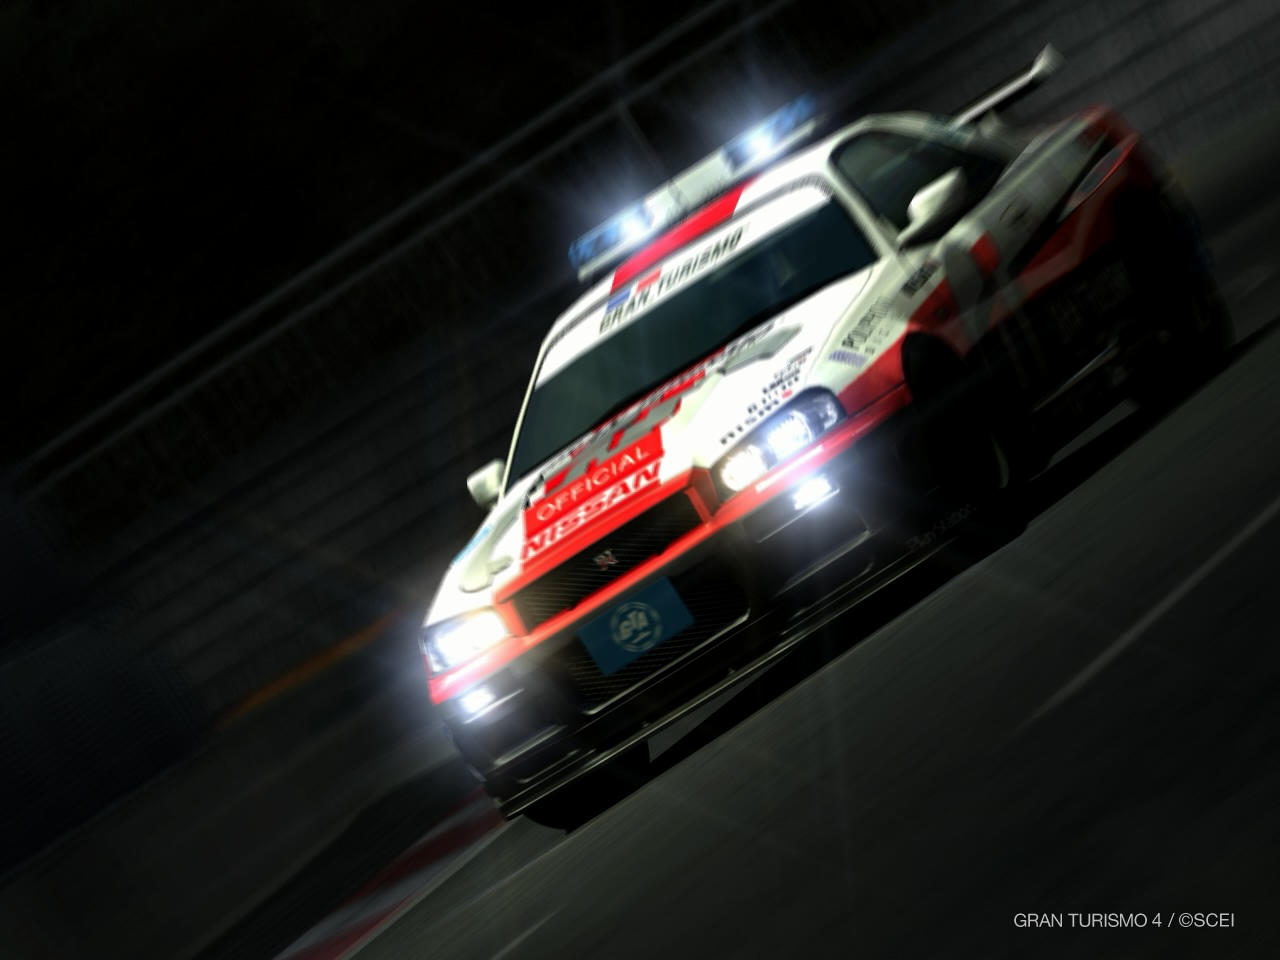 R34 Skyline Pace car by